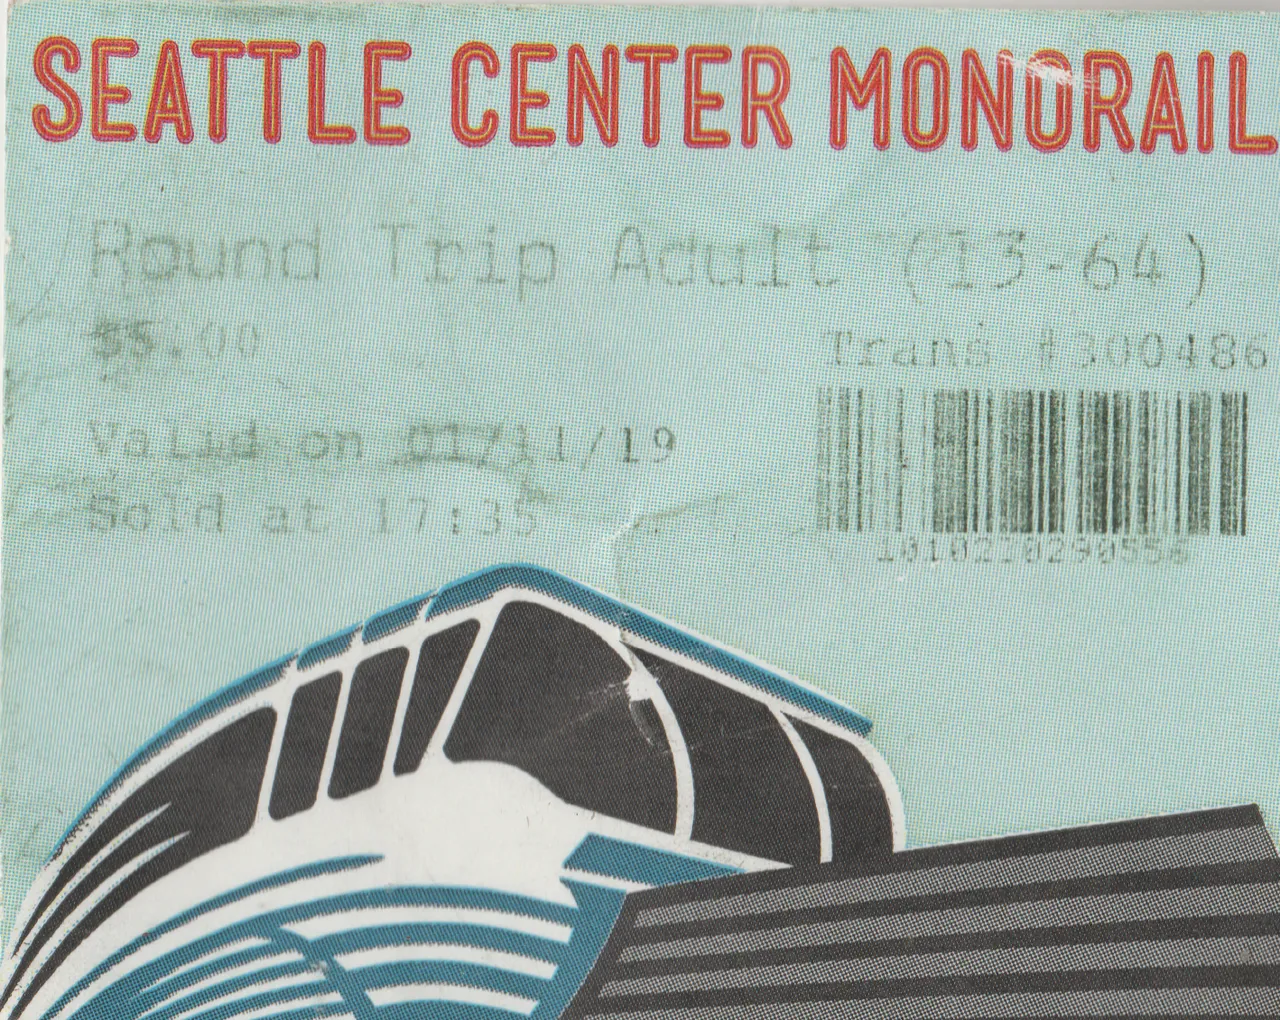 2019-01-11 - Friday - Seattle Center Monorail, Space Needle, Joey, Rick, Maria, Marilyn, this was day 2 of 8 days total of Rick coming to see us in Shelton-1.png